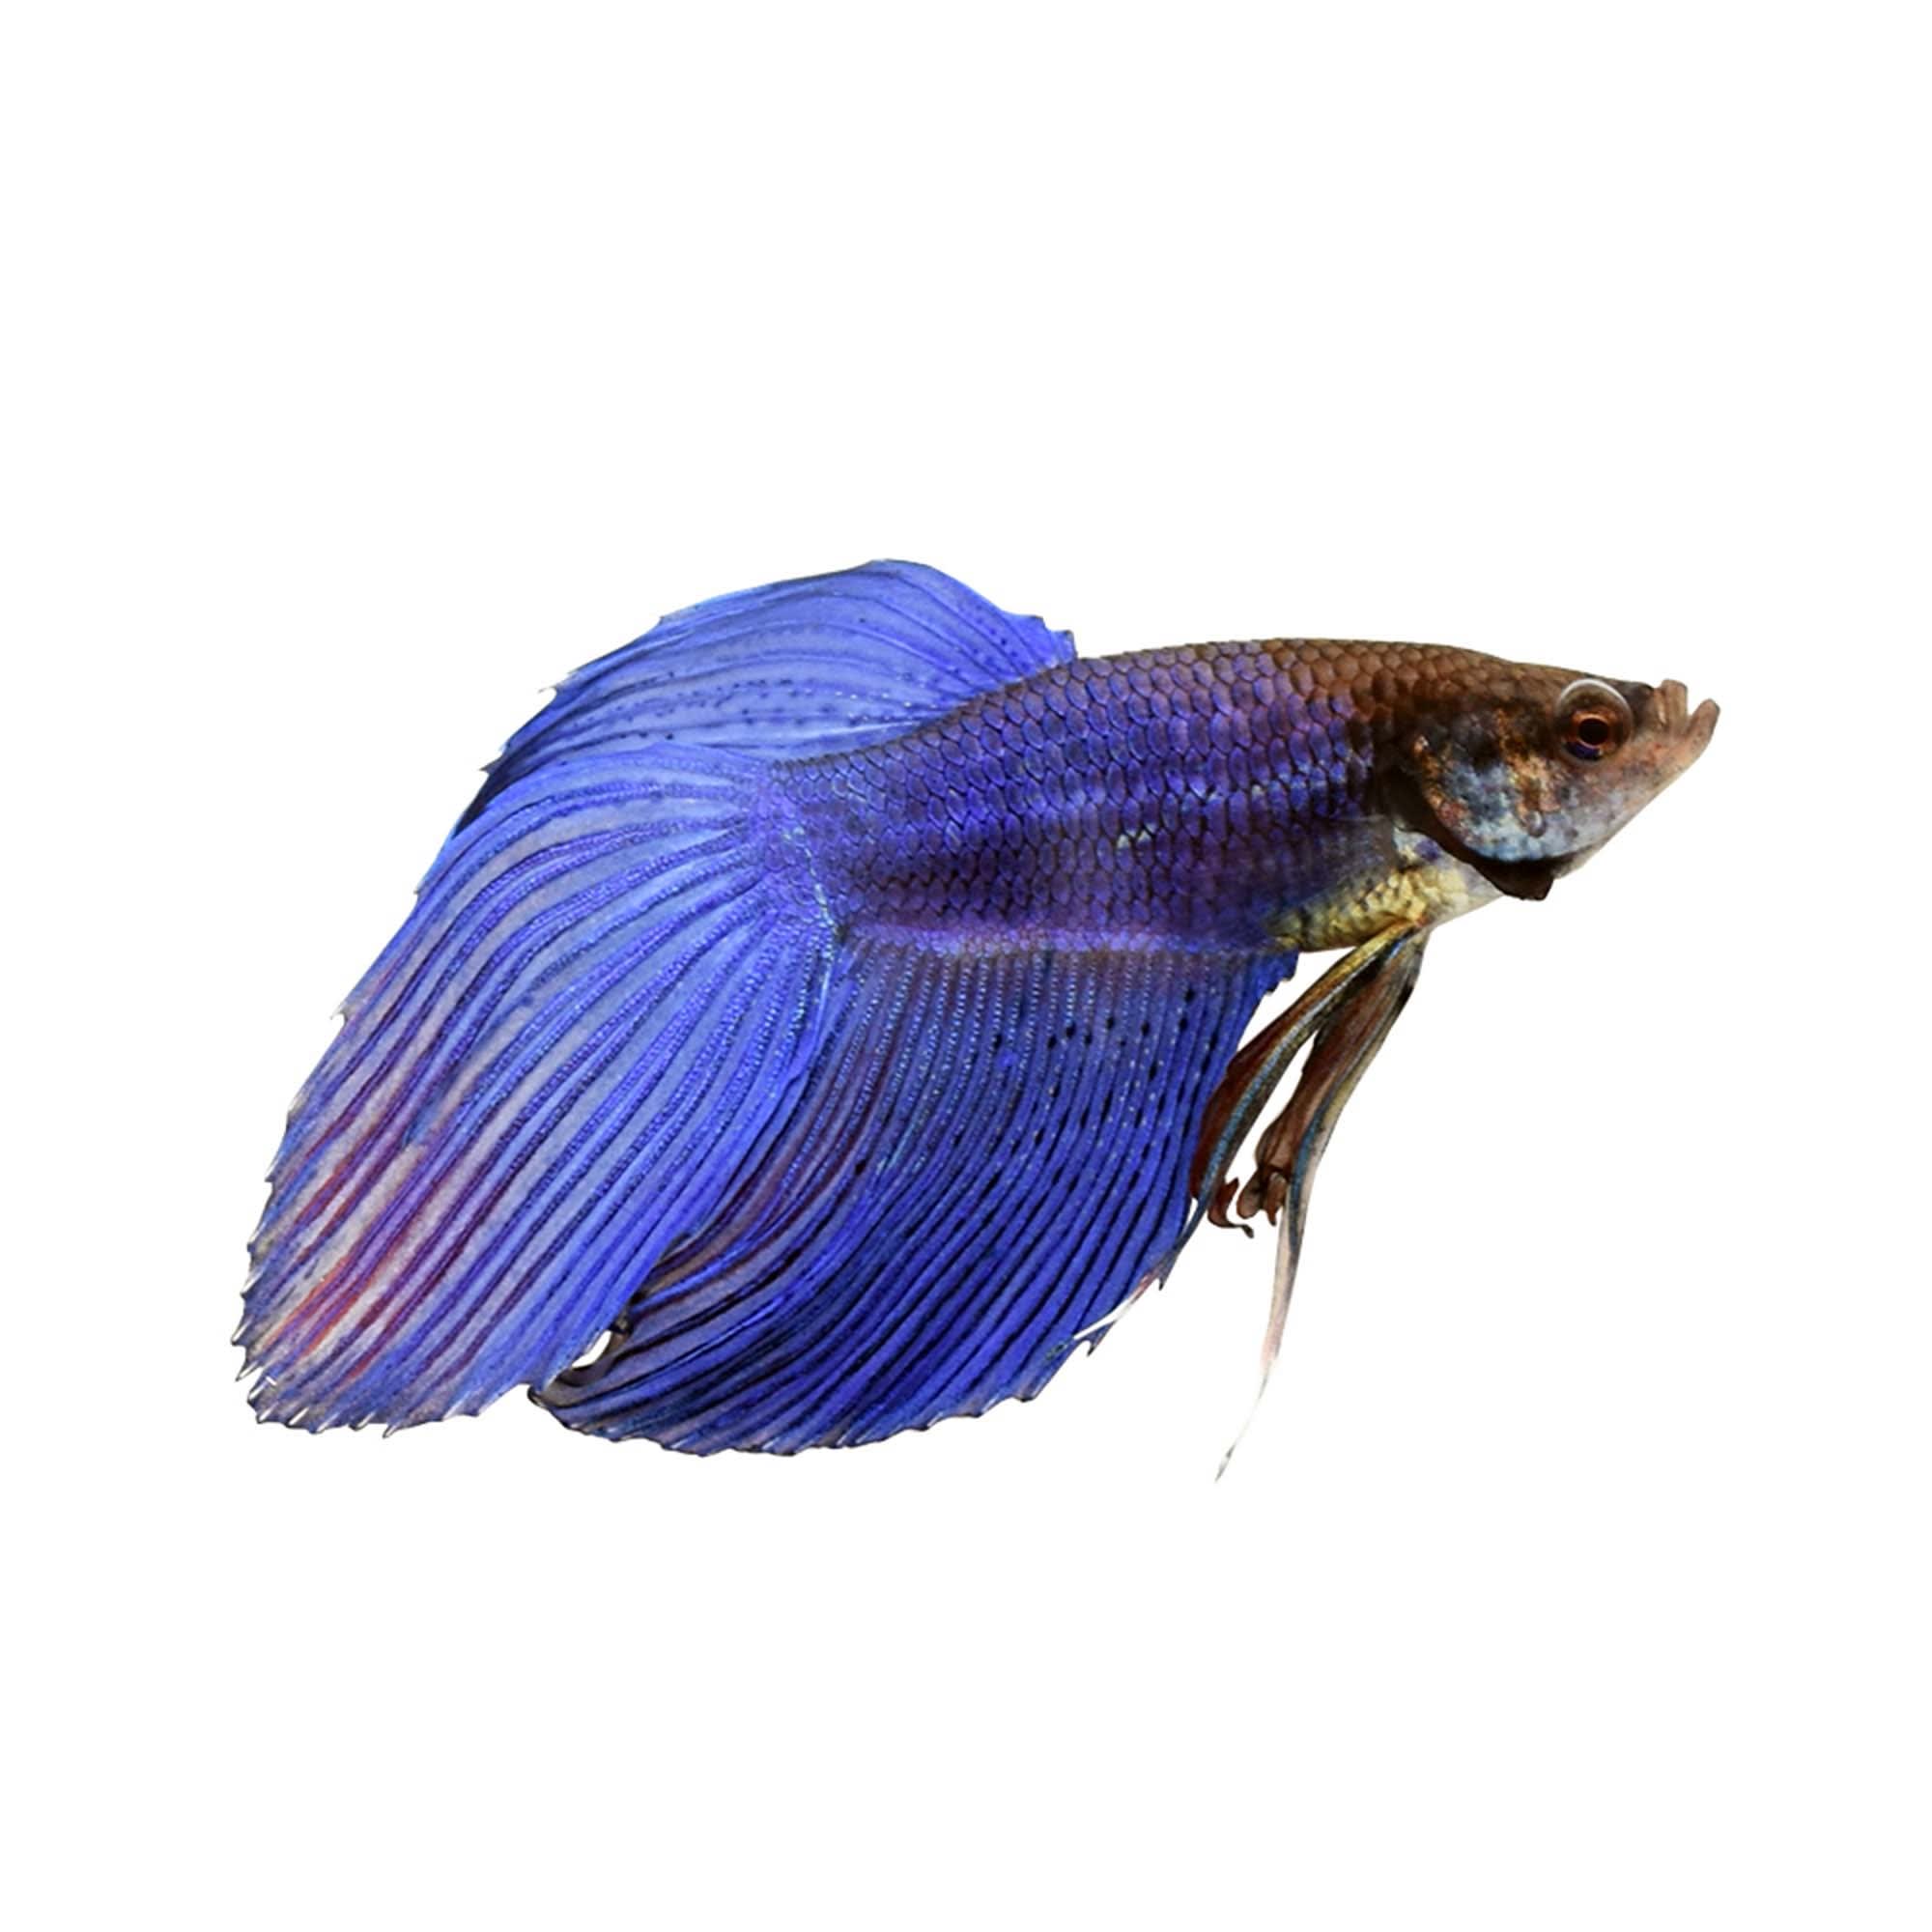 Vibrant and healthy Veiltail Betta Fish with flowing tail